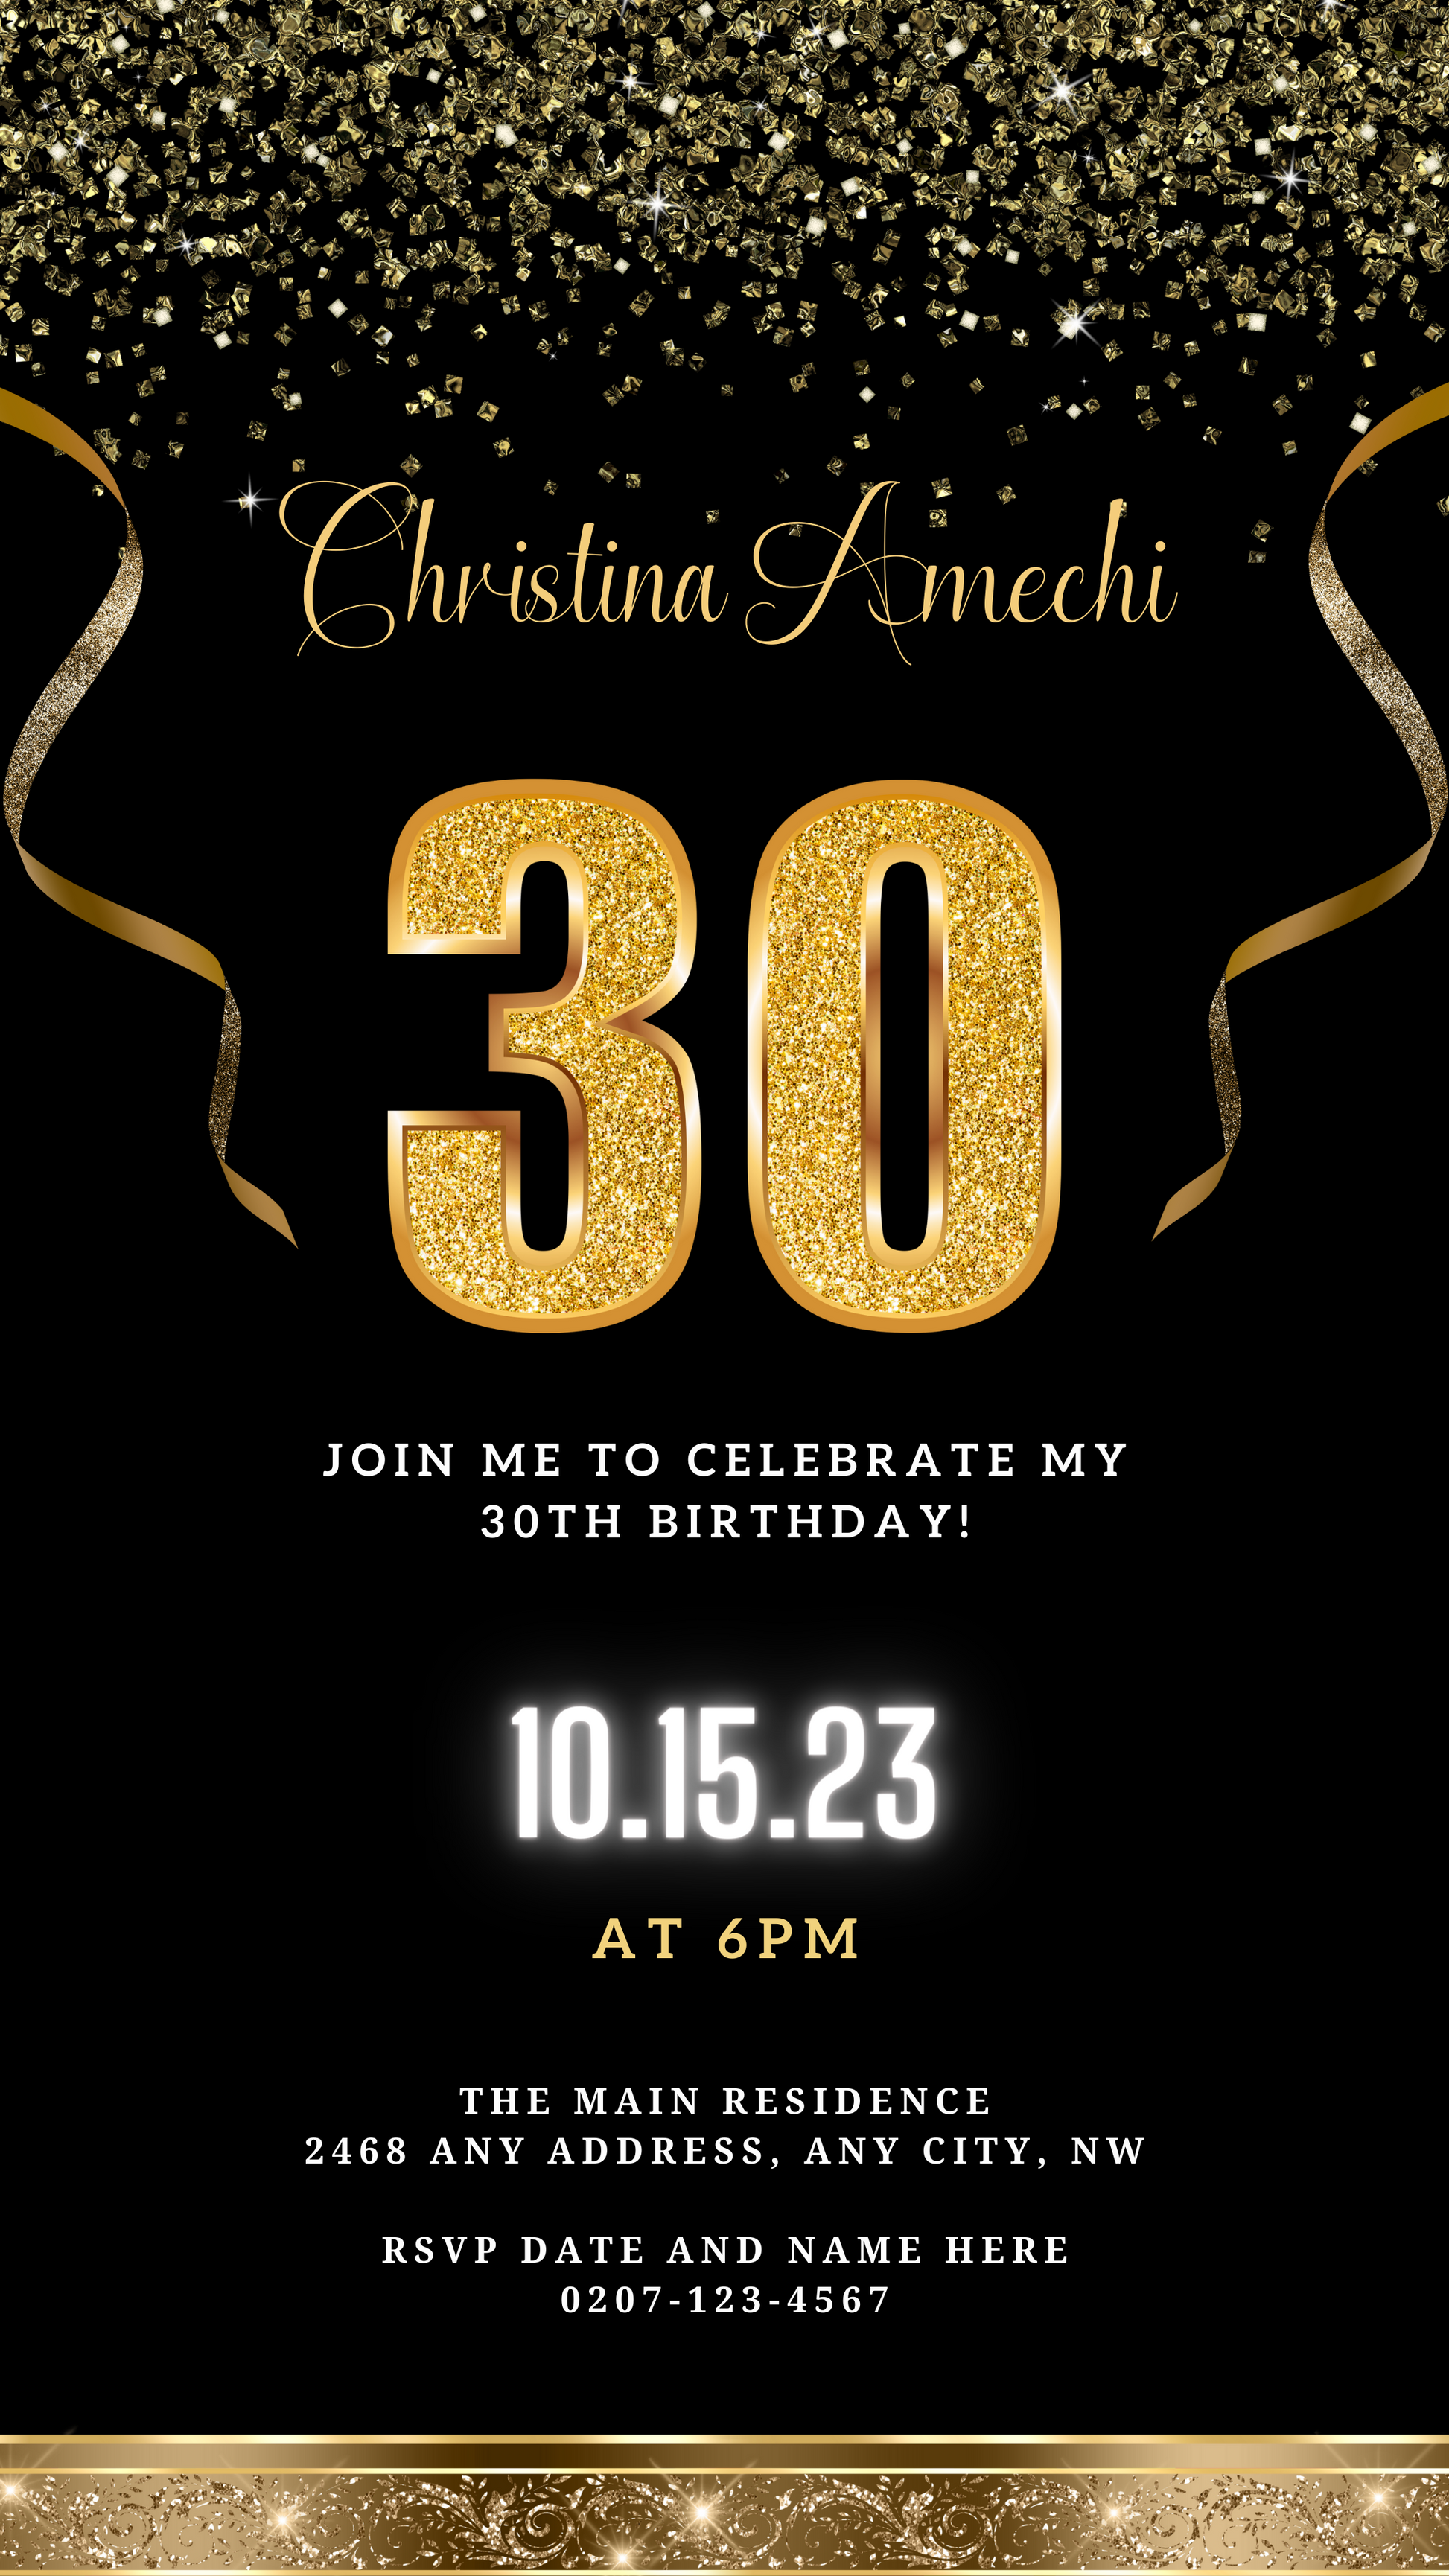 Customisable Digital Black Gold Confetti 30th Birthday Evite featuring gold glittery ribbon and confetti, editable text, and numbers on a black background, ideal for digital sharing.